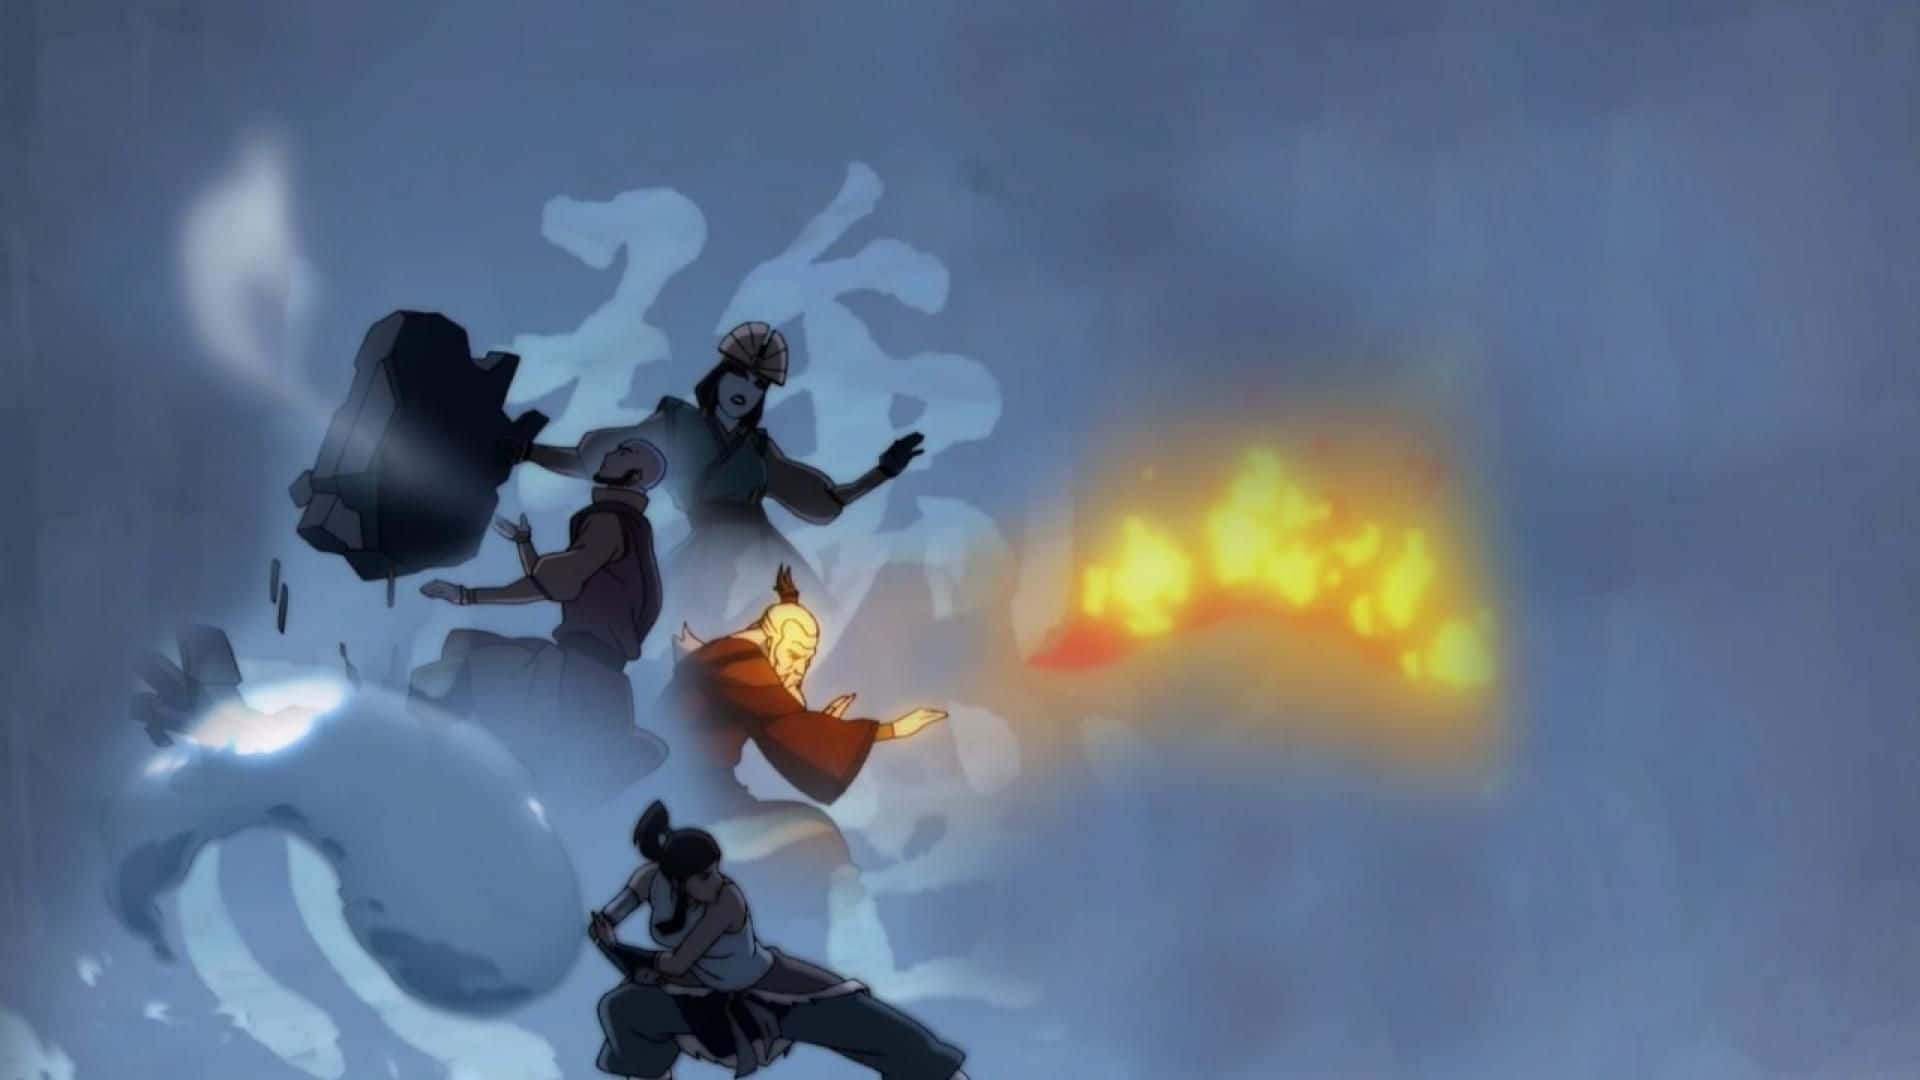 Korra Unleashes Her Full Potential And Avatar Power To Protect Her Kingdom. Background